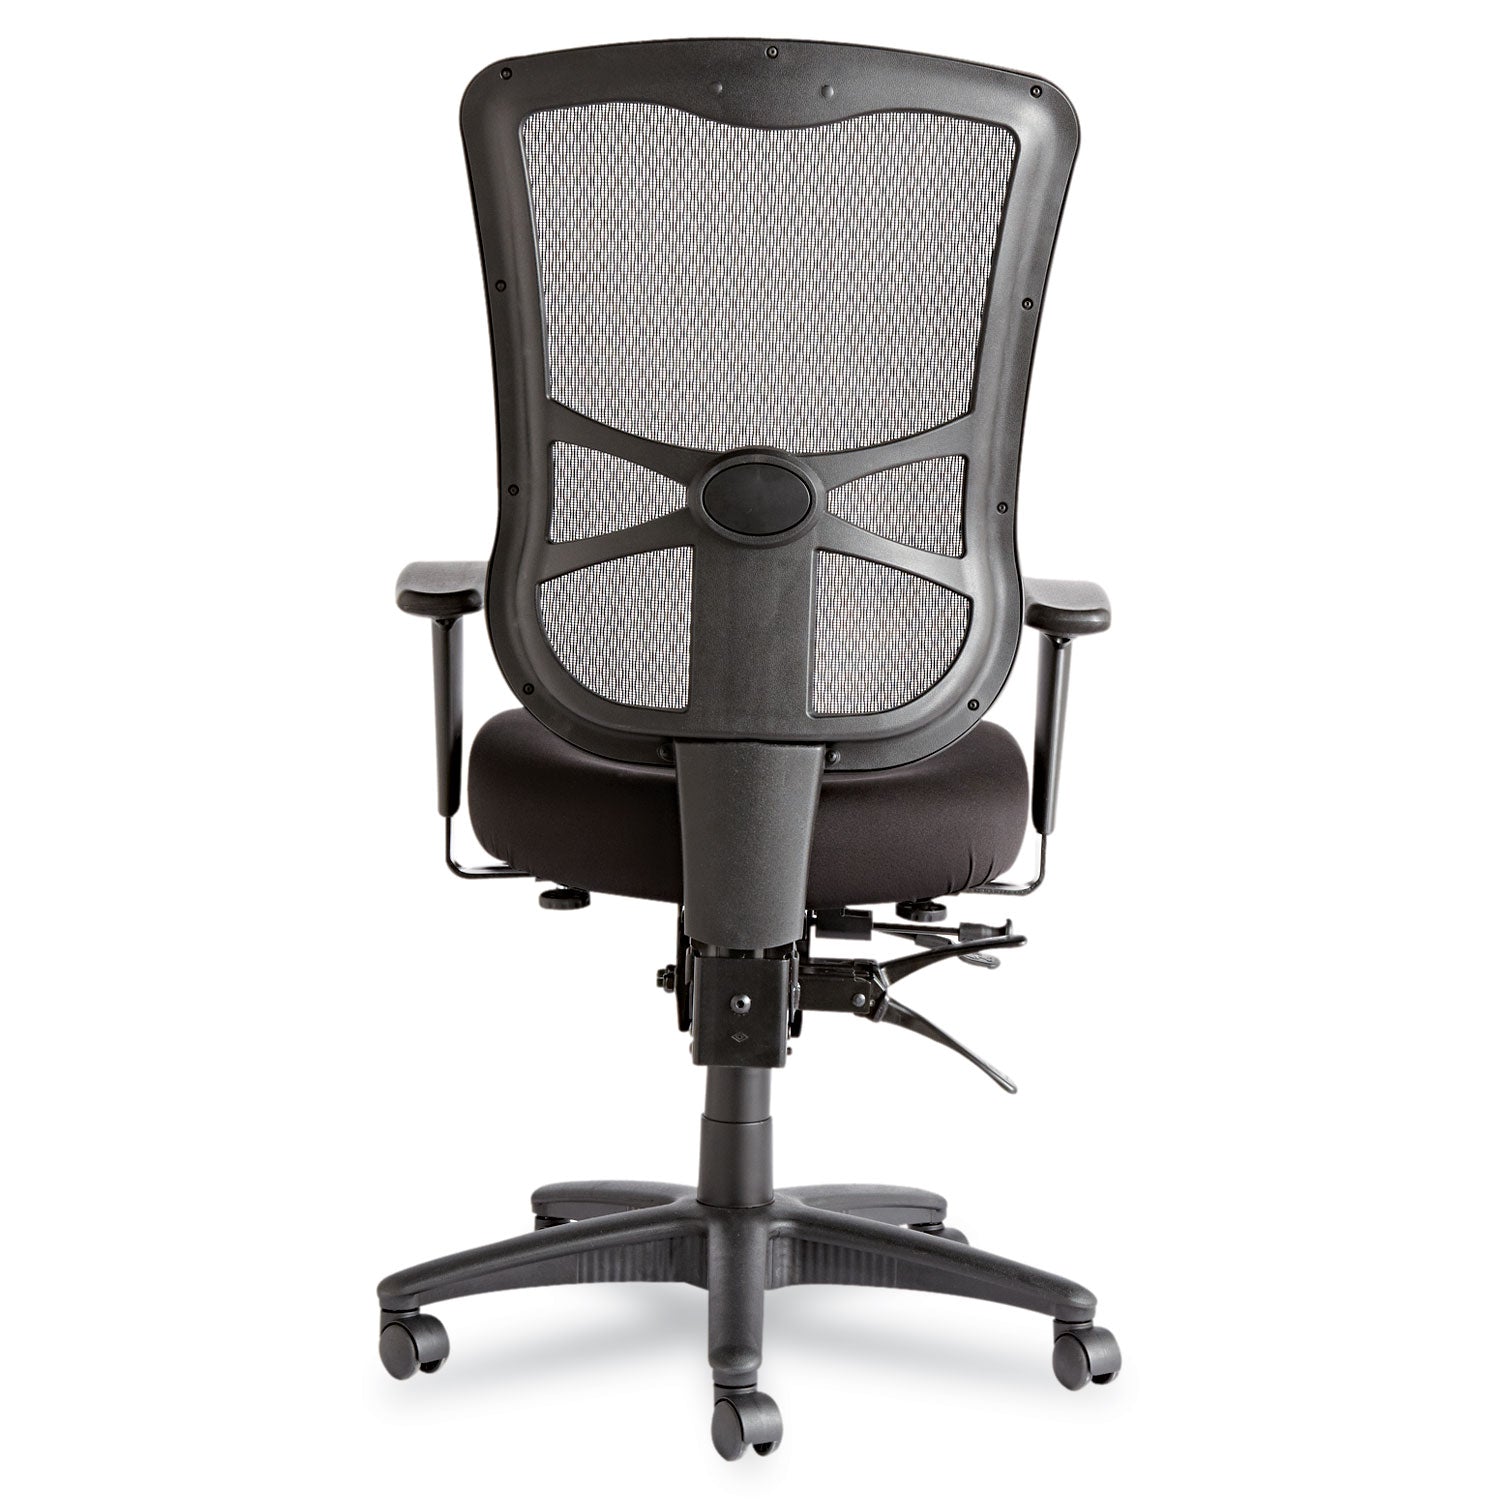 Alera Elusion Series Mesh High-Back Multifunction Chair, Supports Up to 275 lb, 17.2" to 20.6" Seat Height, Black - 